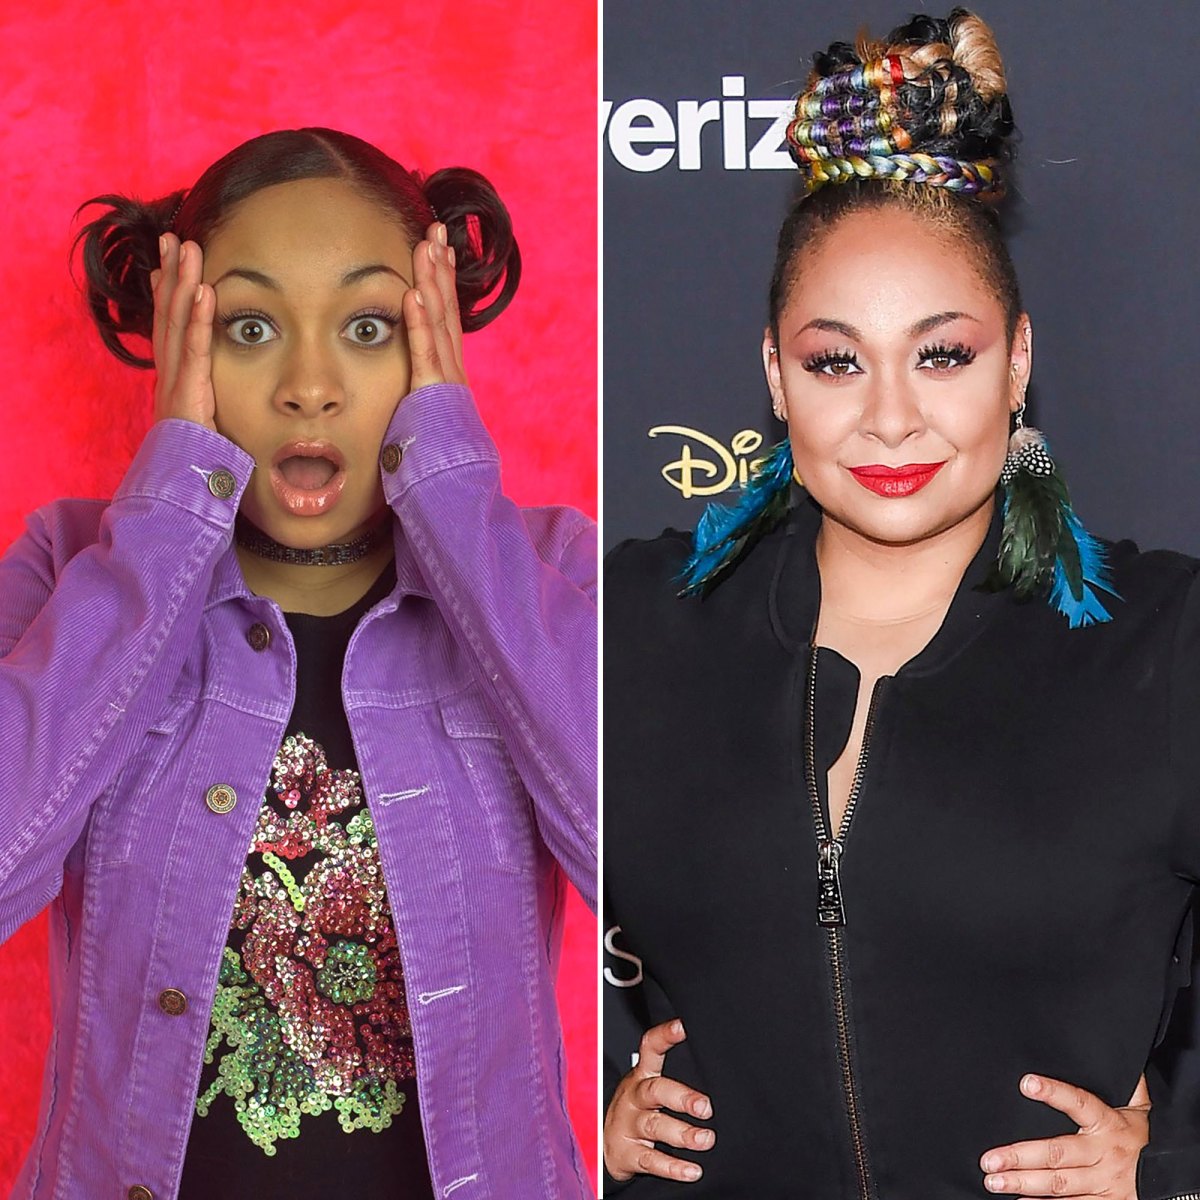 https://www.lifeandstylemag.com/wp-content/uploads/2021/04/Raven-Symone-Favorite-Disney-Channel-Stars-Then-and-Now.jpg?resize=1200%2C1200&quality=86&strip=all